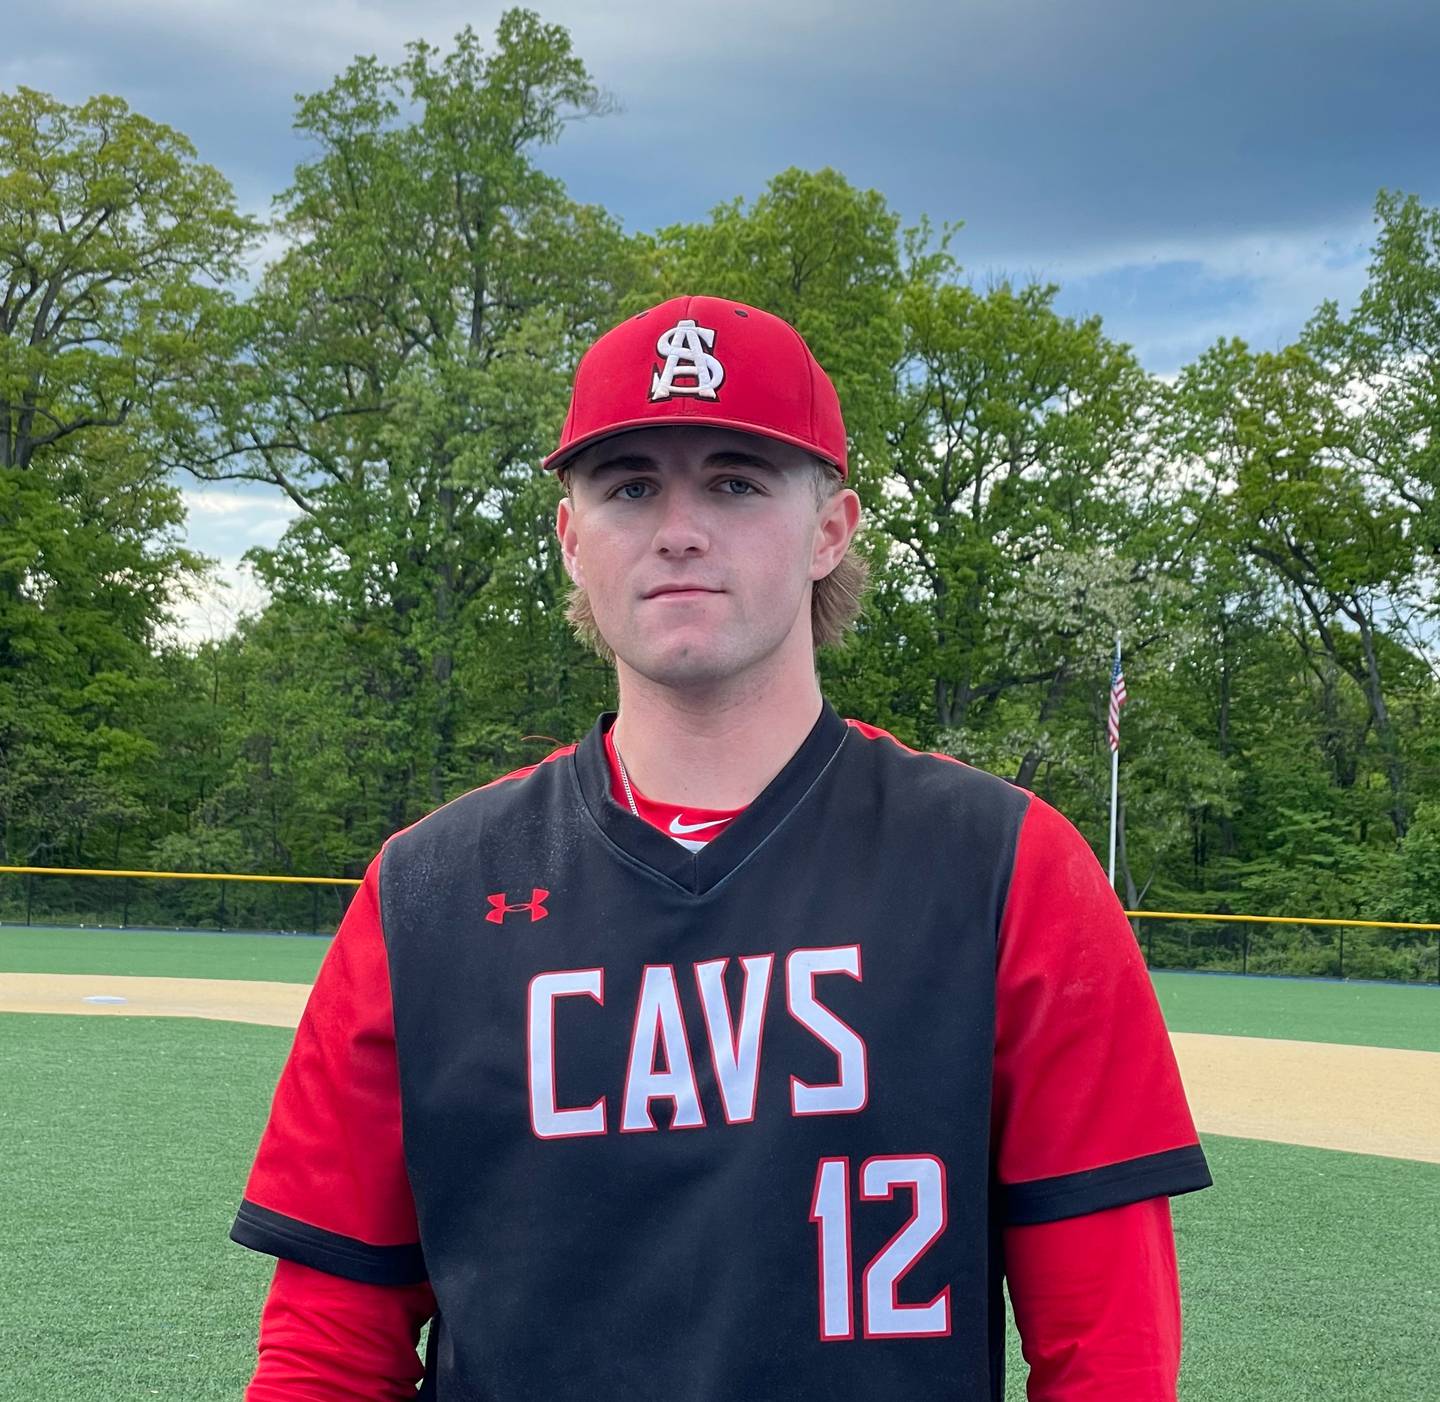 Parker Thomas was again a force on the mound for Archbishop Spalding Fridat. The East Carolina University recruit pitched a complete-game 6-hitter as the top-ranked Cavaliers edged No. 5 Loyola Blakefield, 1-0, in a key MIAA A Conference baseball game in Towson.